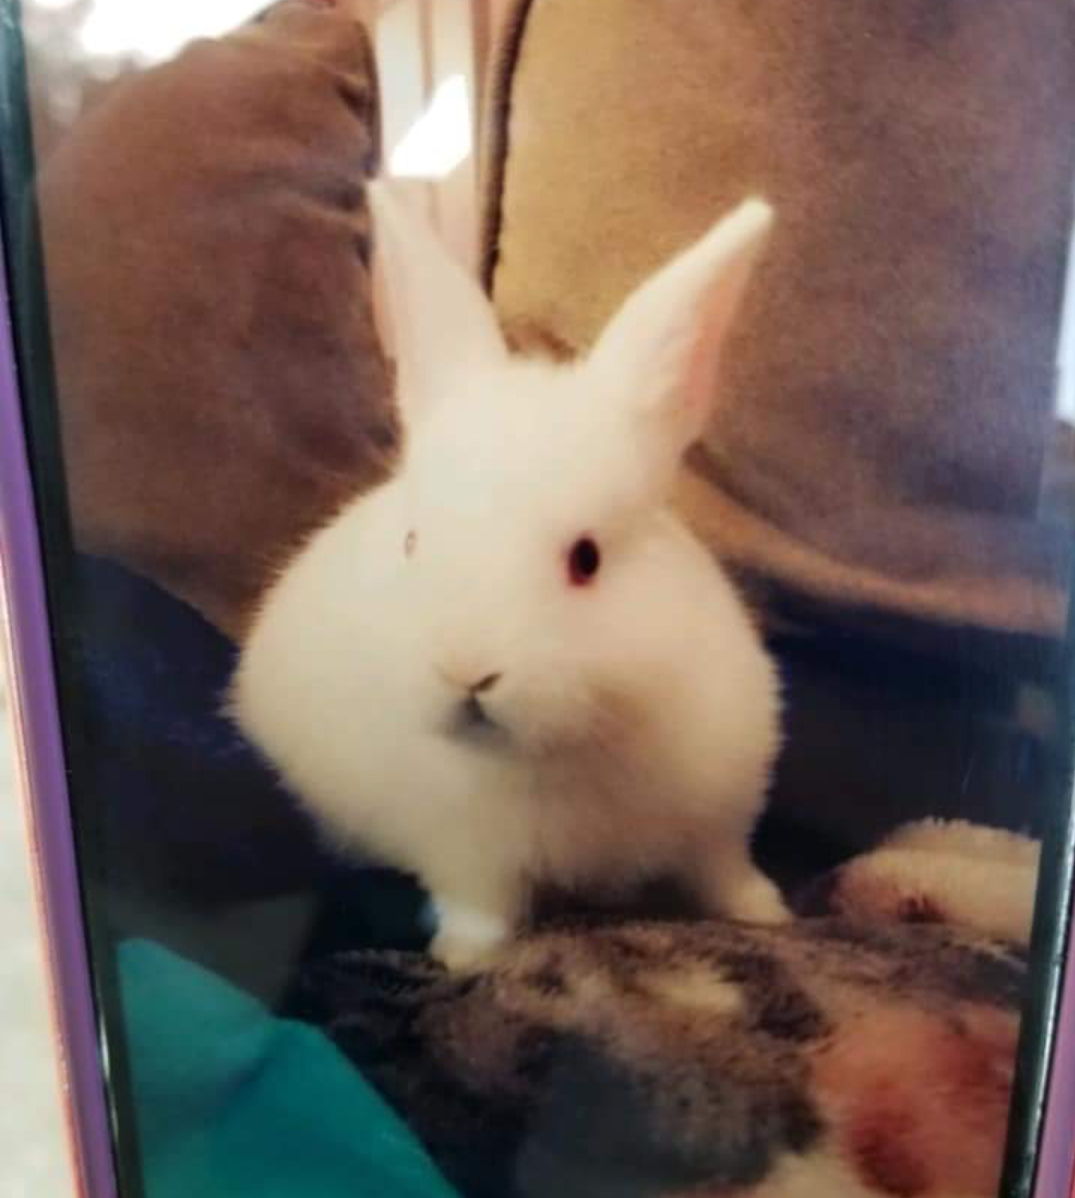 Man arrested for throwing a bunny into a wall, the bunny died